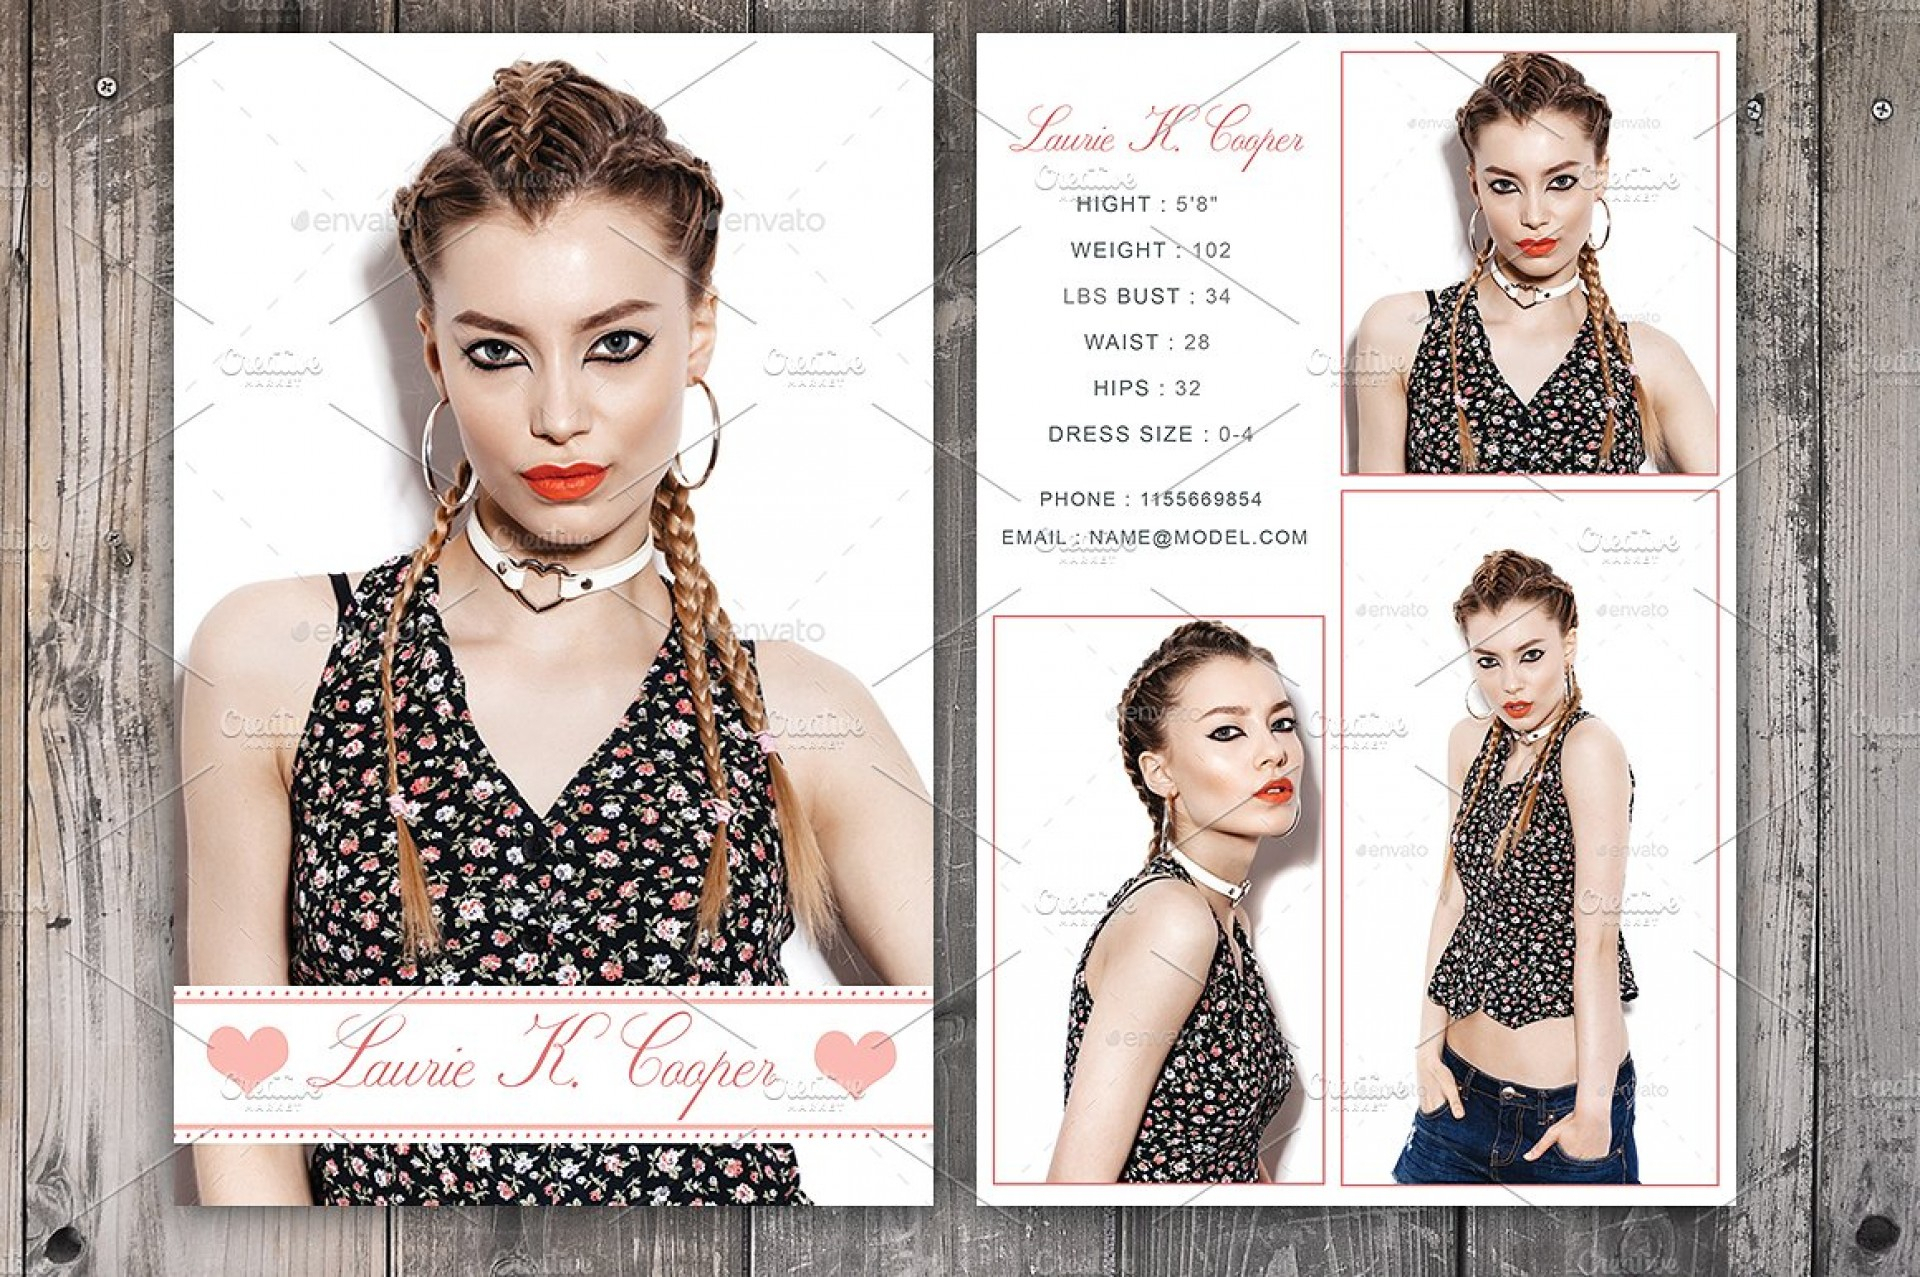 005 Model Comp Card Template Ideas Outstanding Photoshop For Free Model Comp Card Template Psd